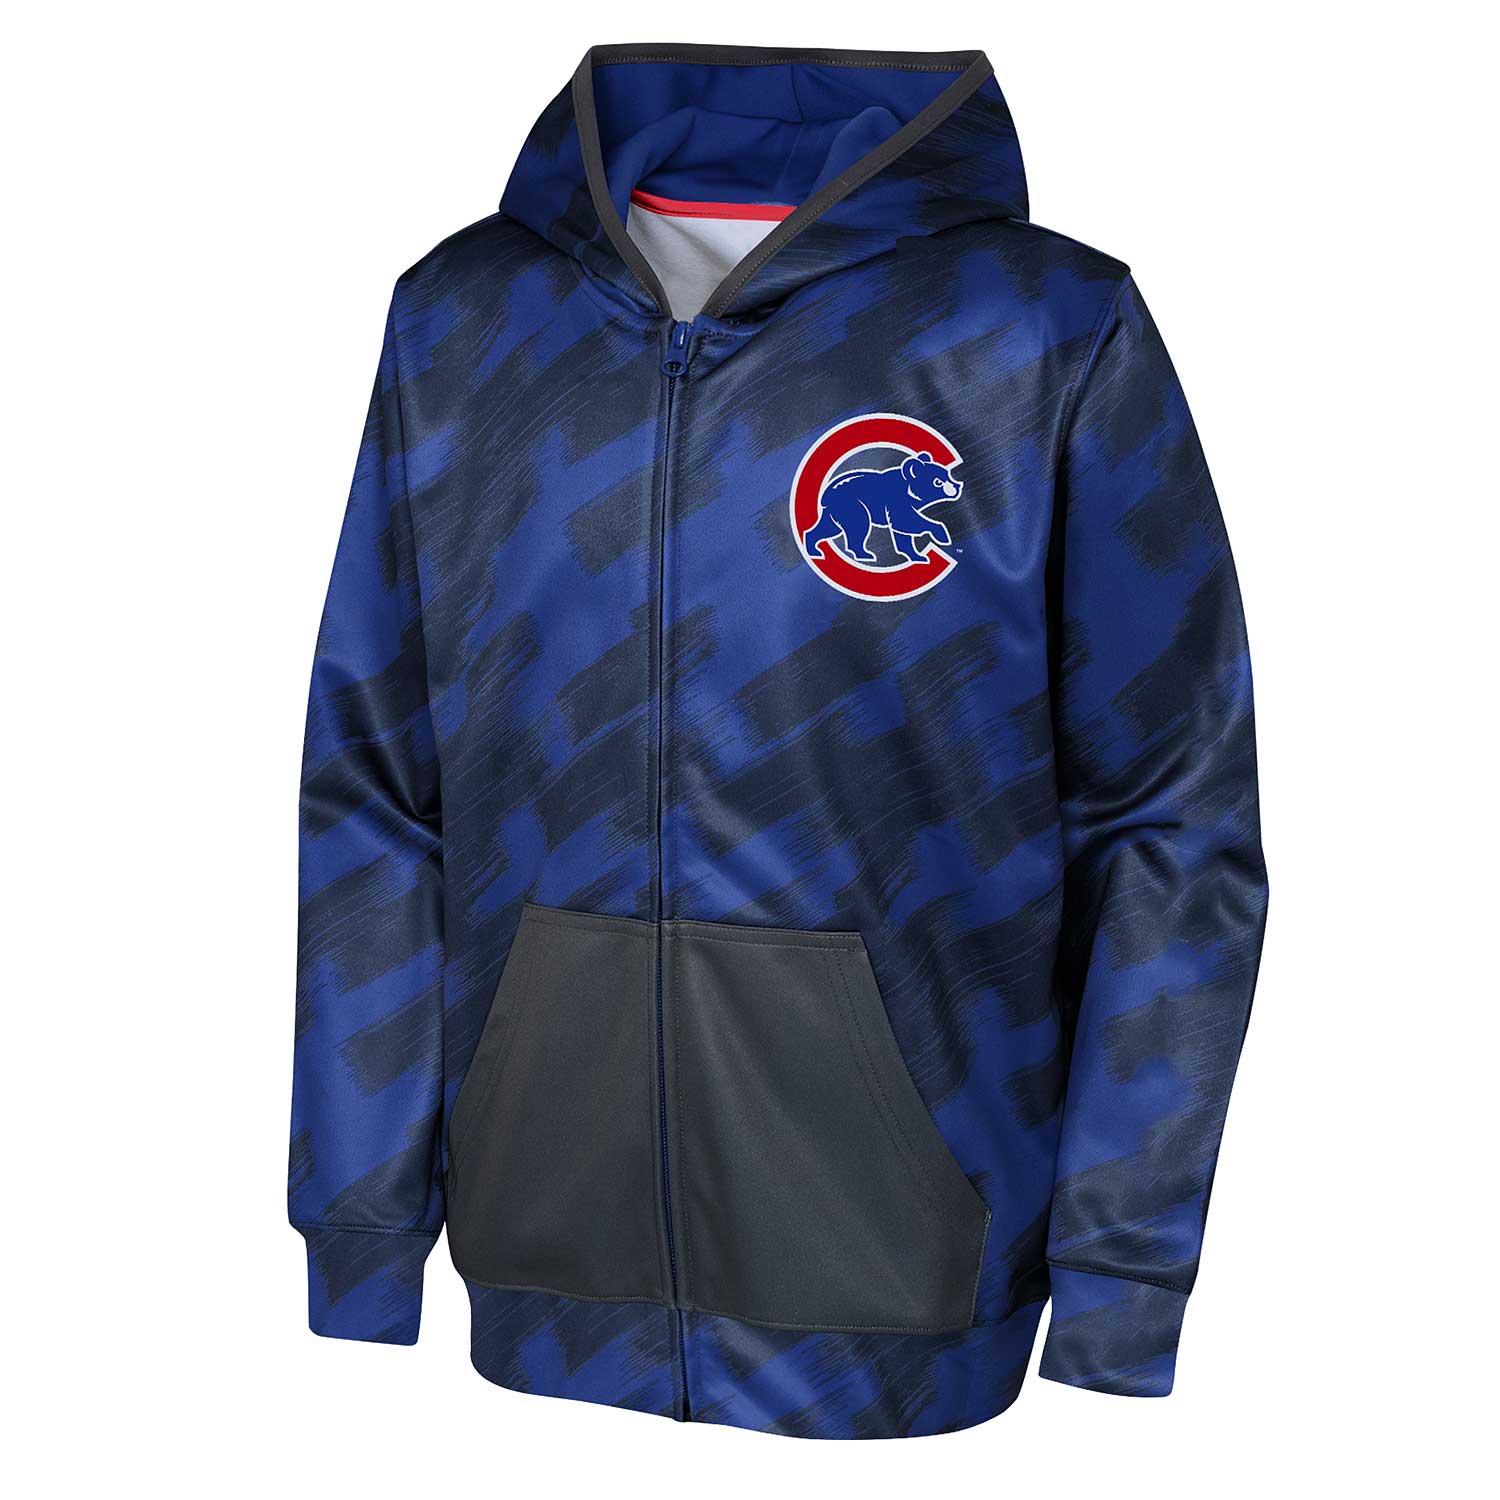 cubs youth jacket